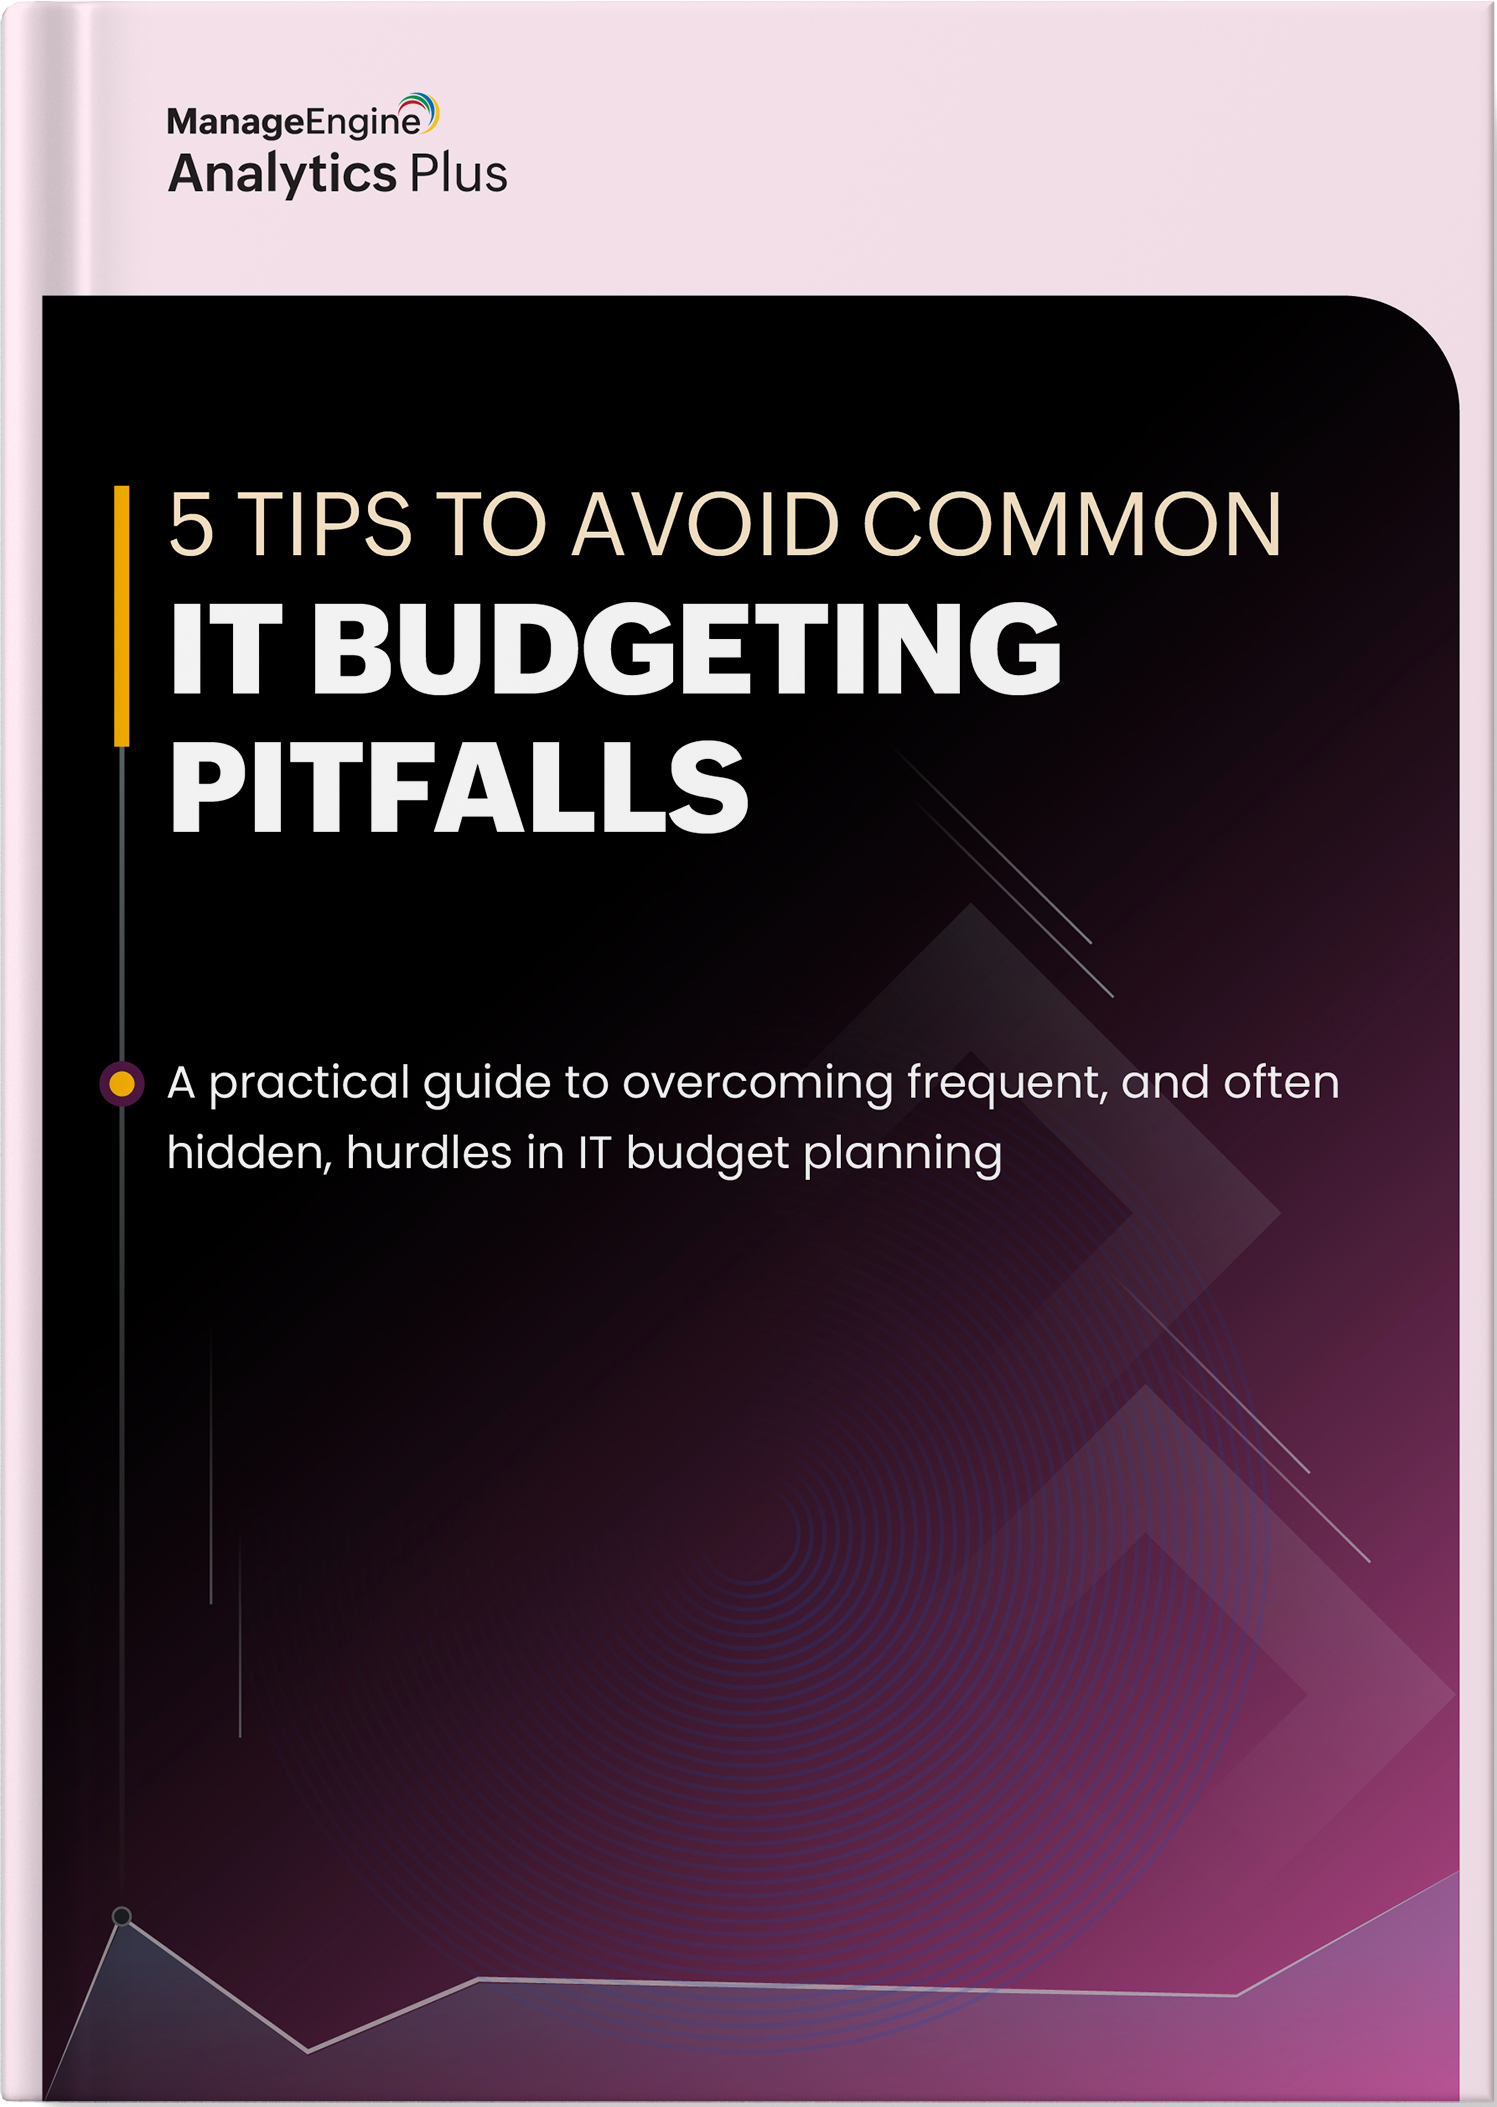 5 tips to avoid common IT budgeting pitfalls